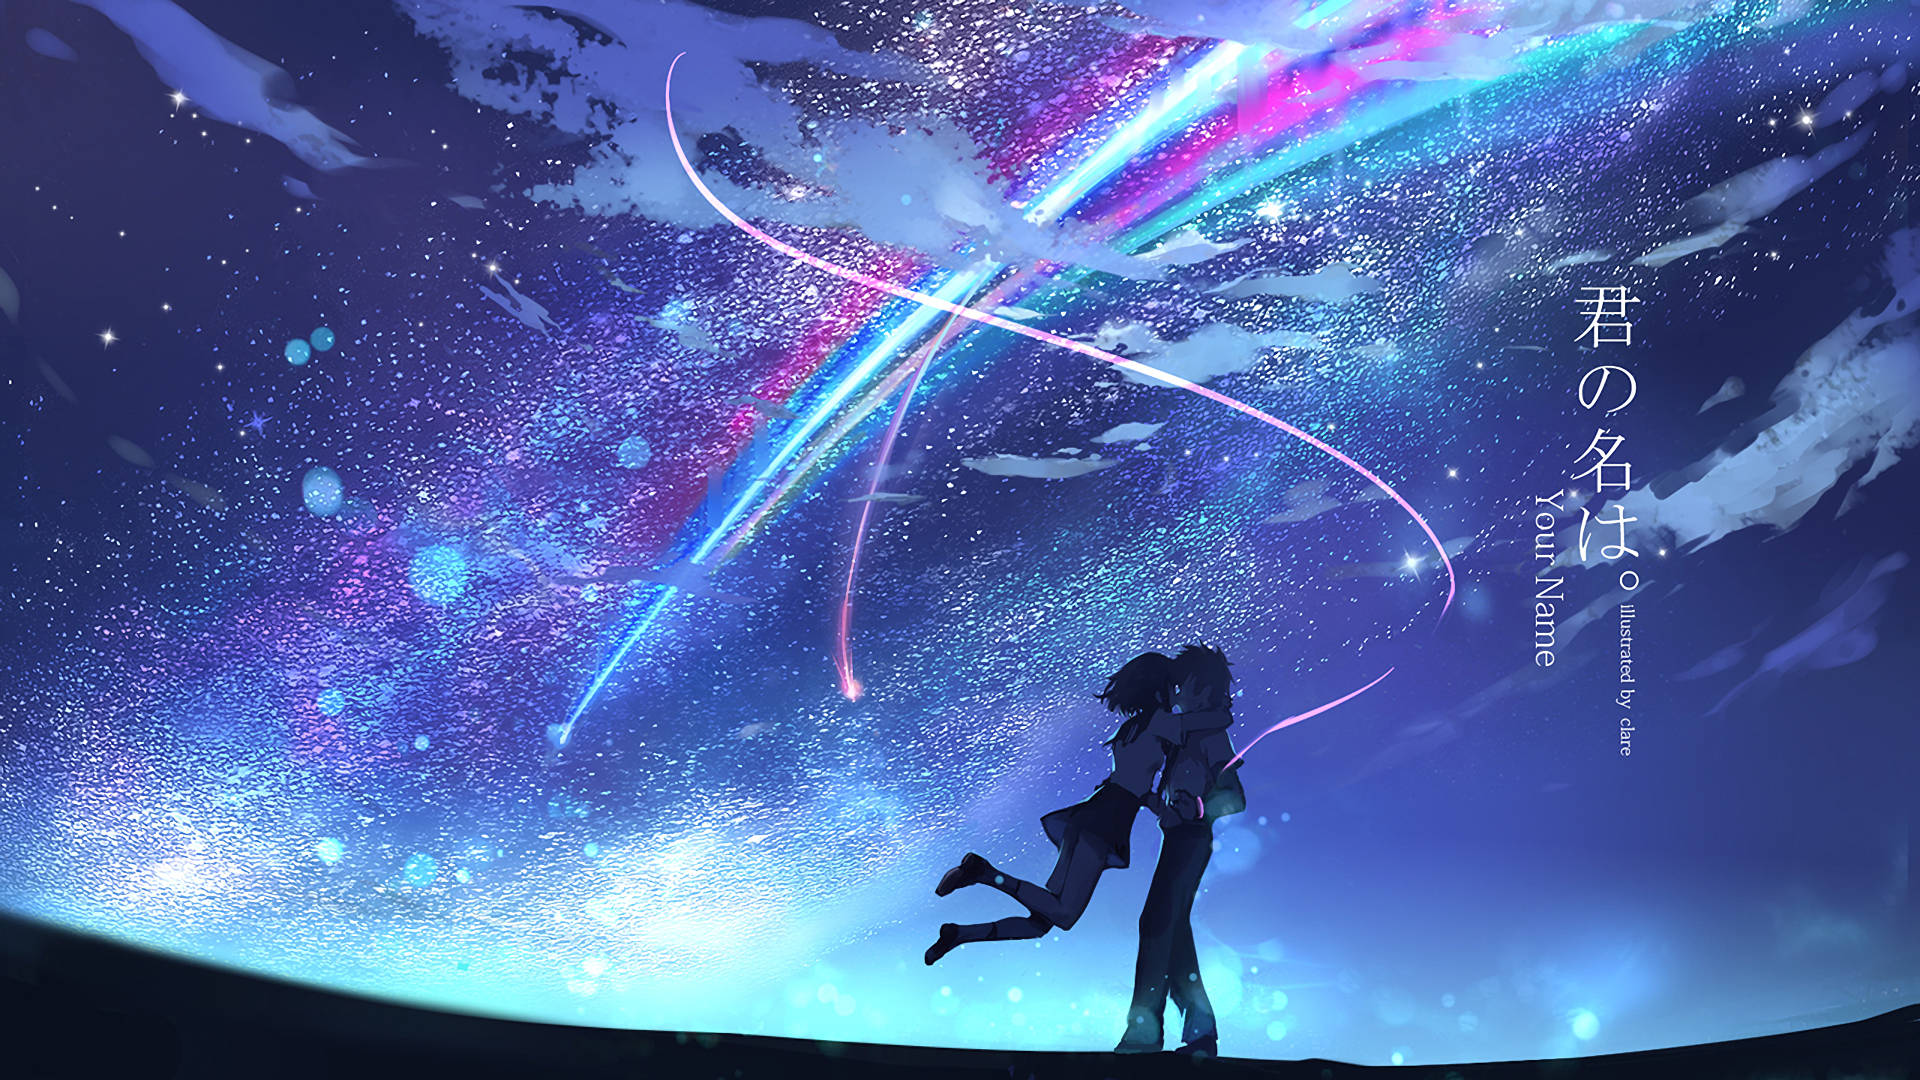 Your Name Anime 2016 Comet Illustration Background